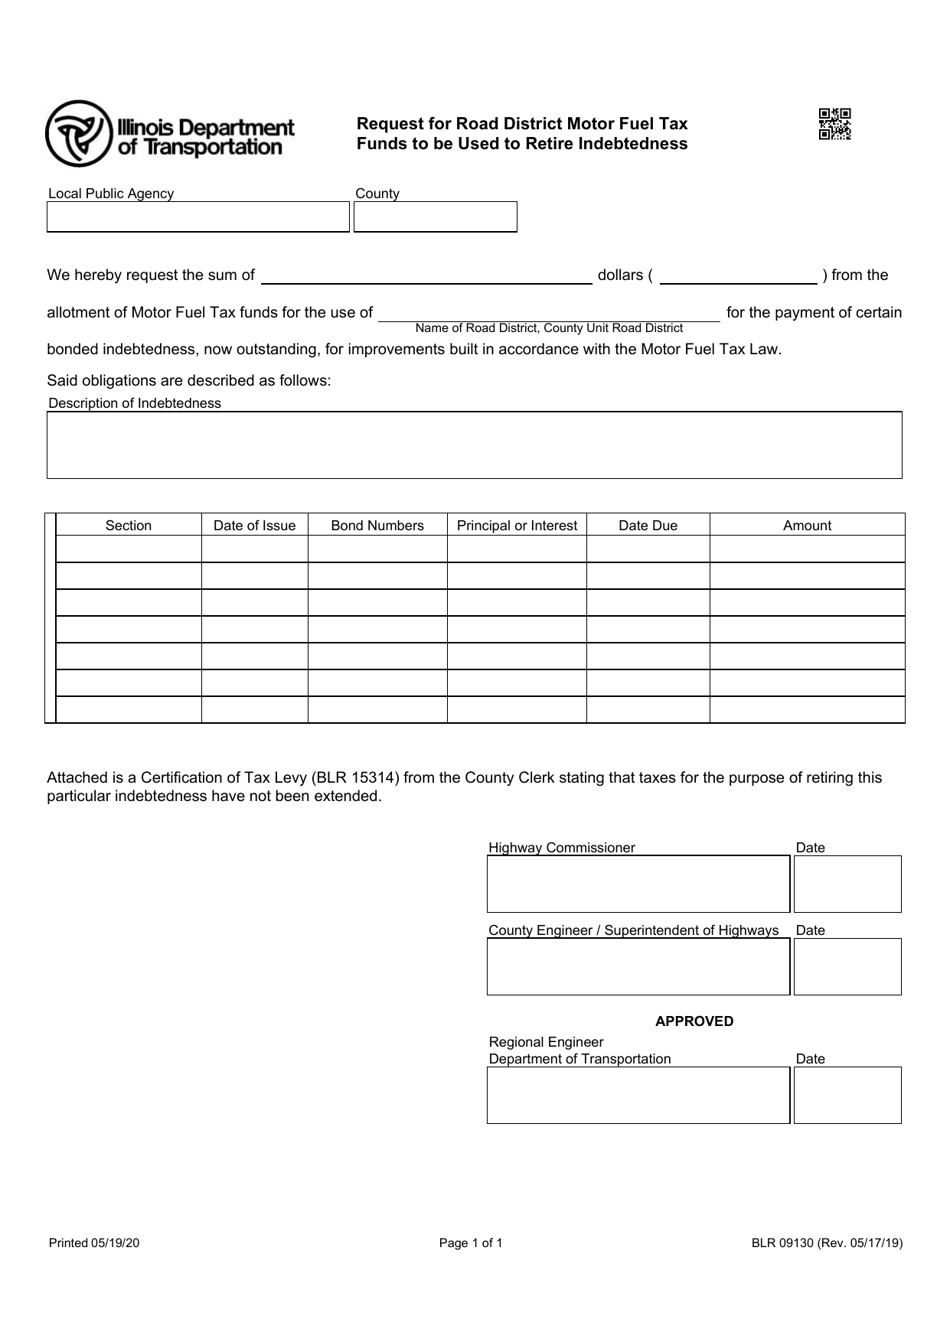 Form BLR09130 Request for Road District Motor Fuel Tax Funds to Be Used to Retire Indebtedness - Illinois, Page 1